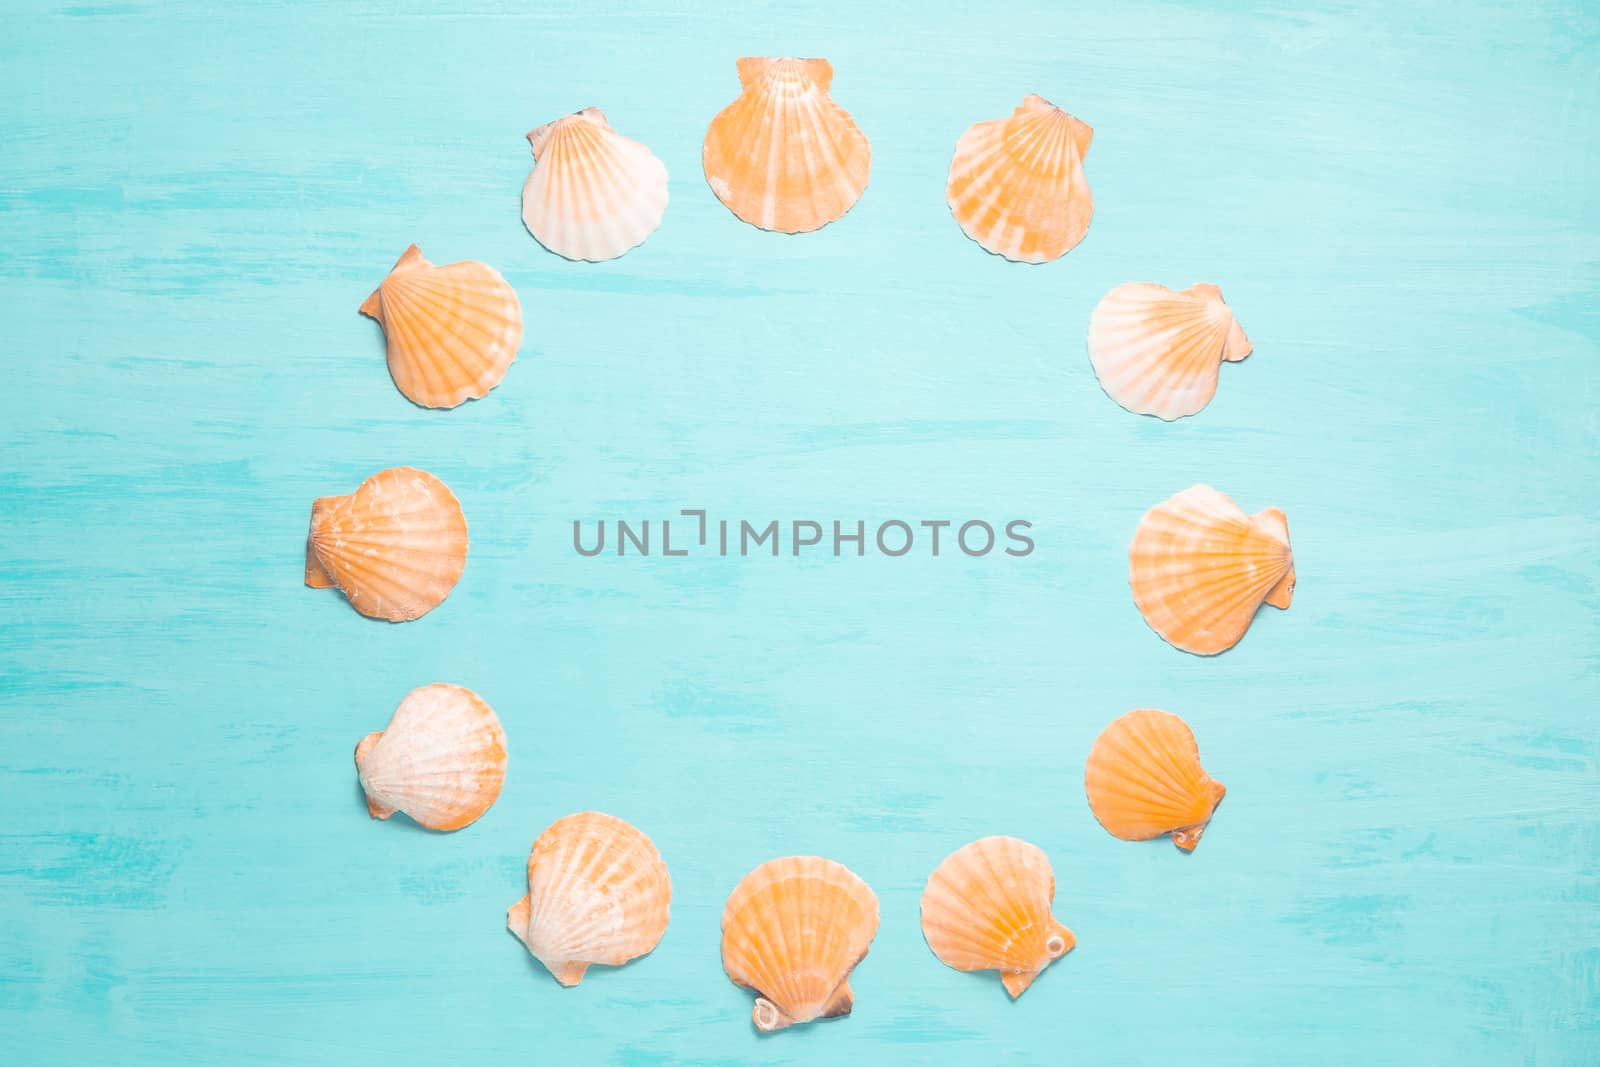 Blue sea background with copy space and round frame made of seashells, summer holiday and vacation concept.